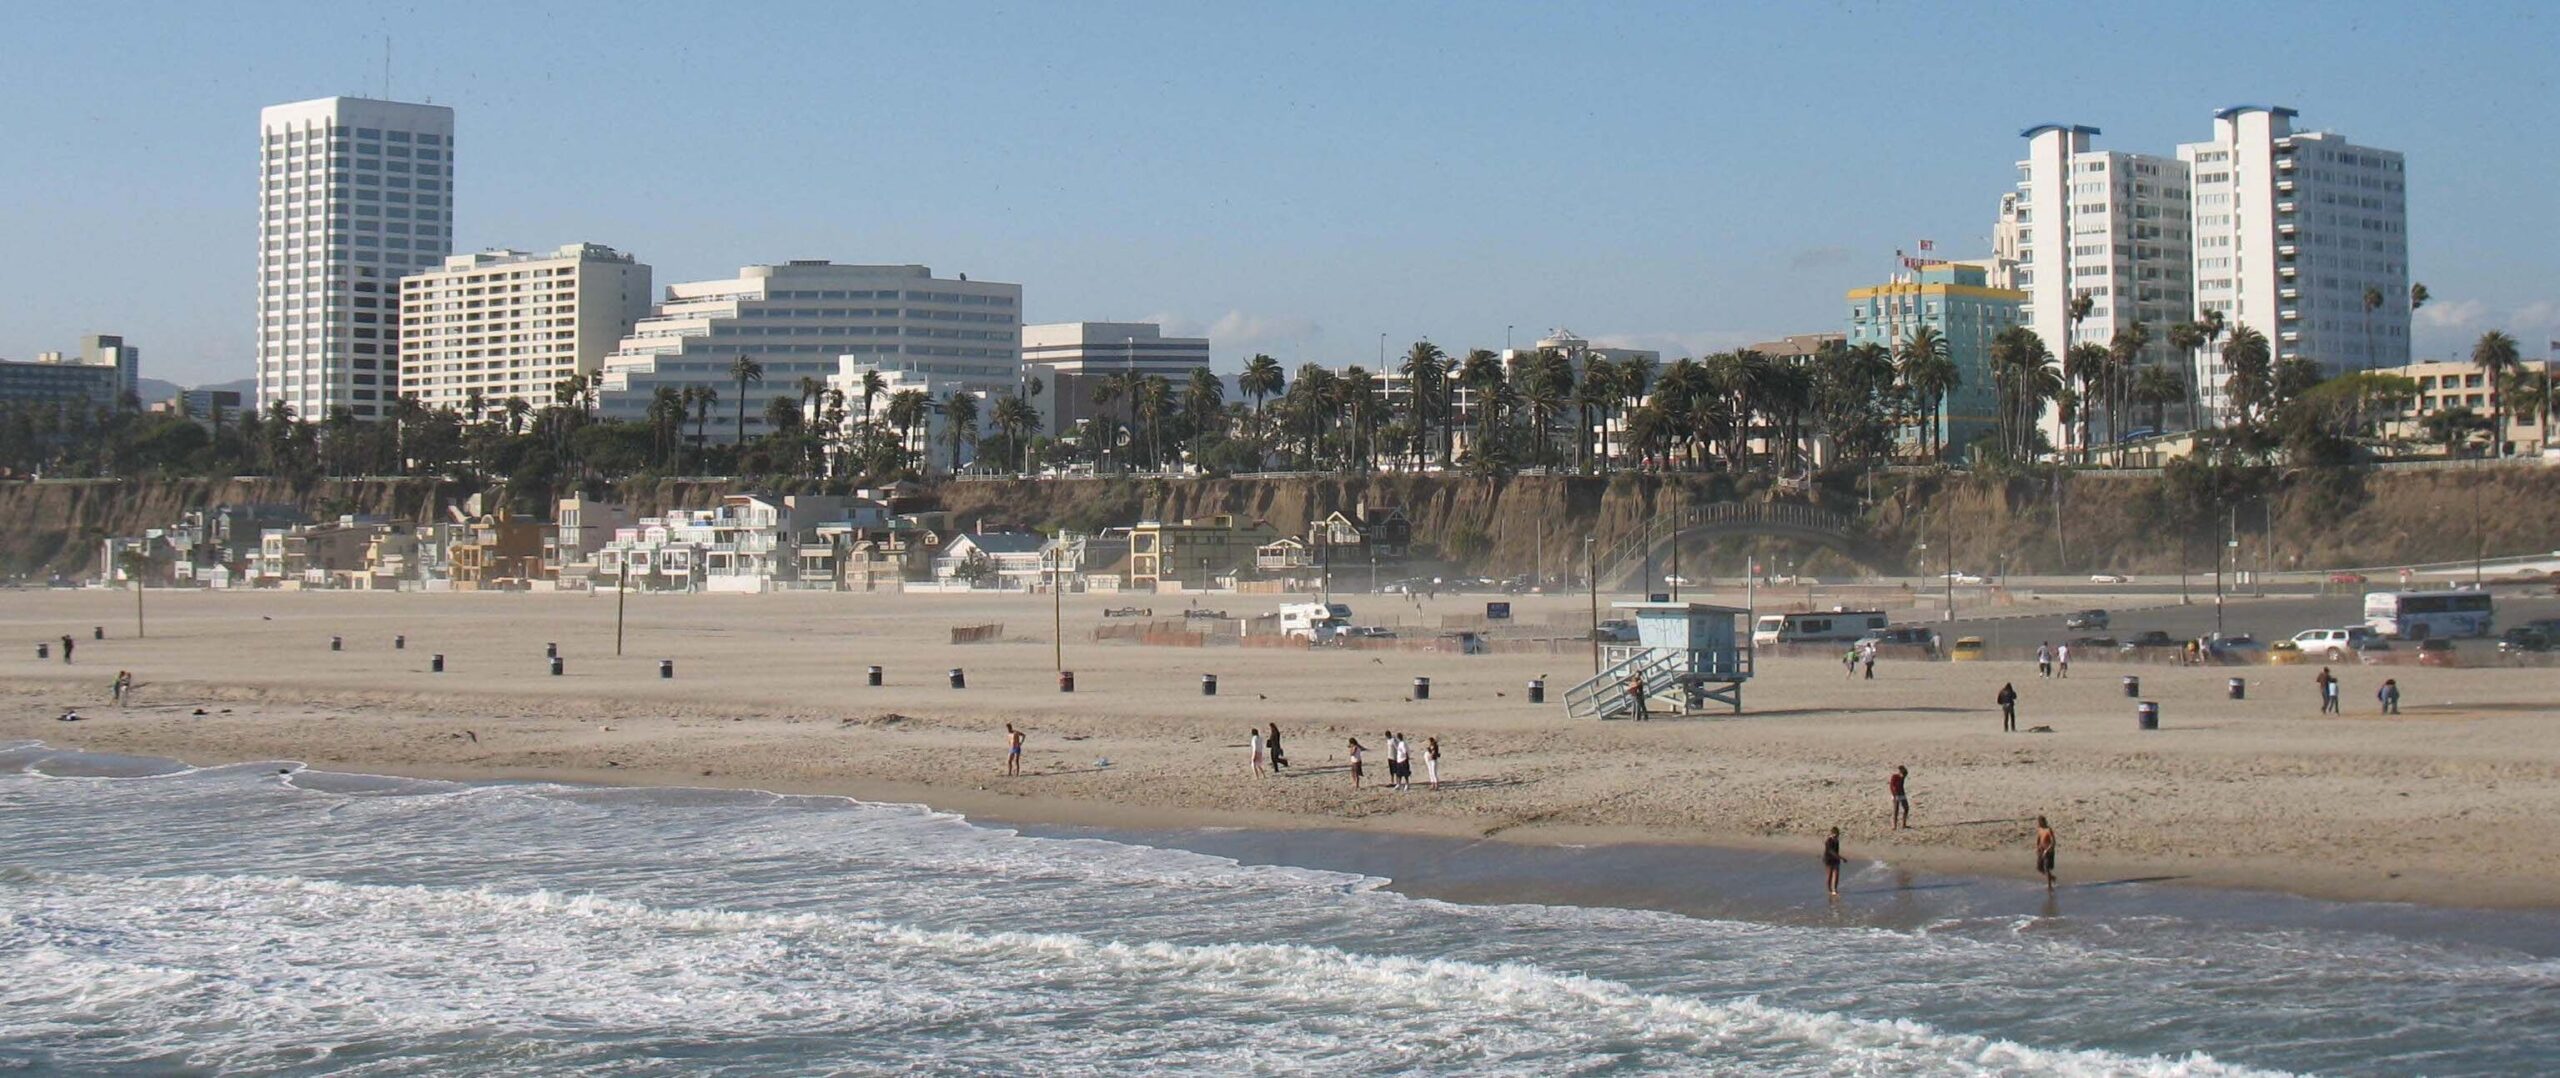 Santa Monica beach with a tall large office building housing Santa Monica Injury Attorneys in the skyline